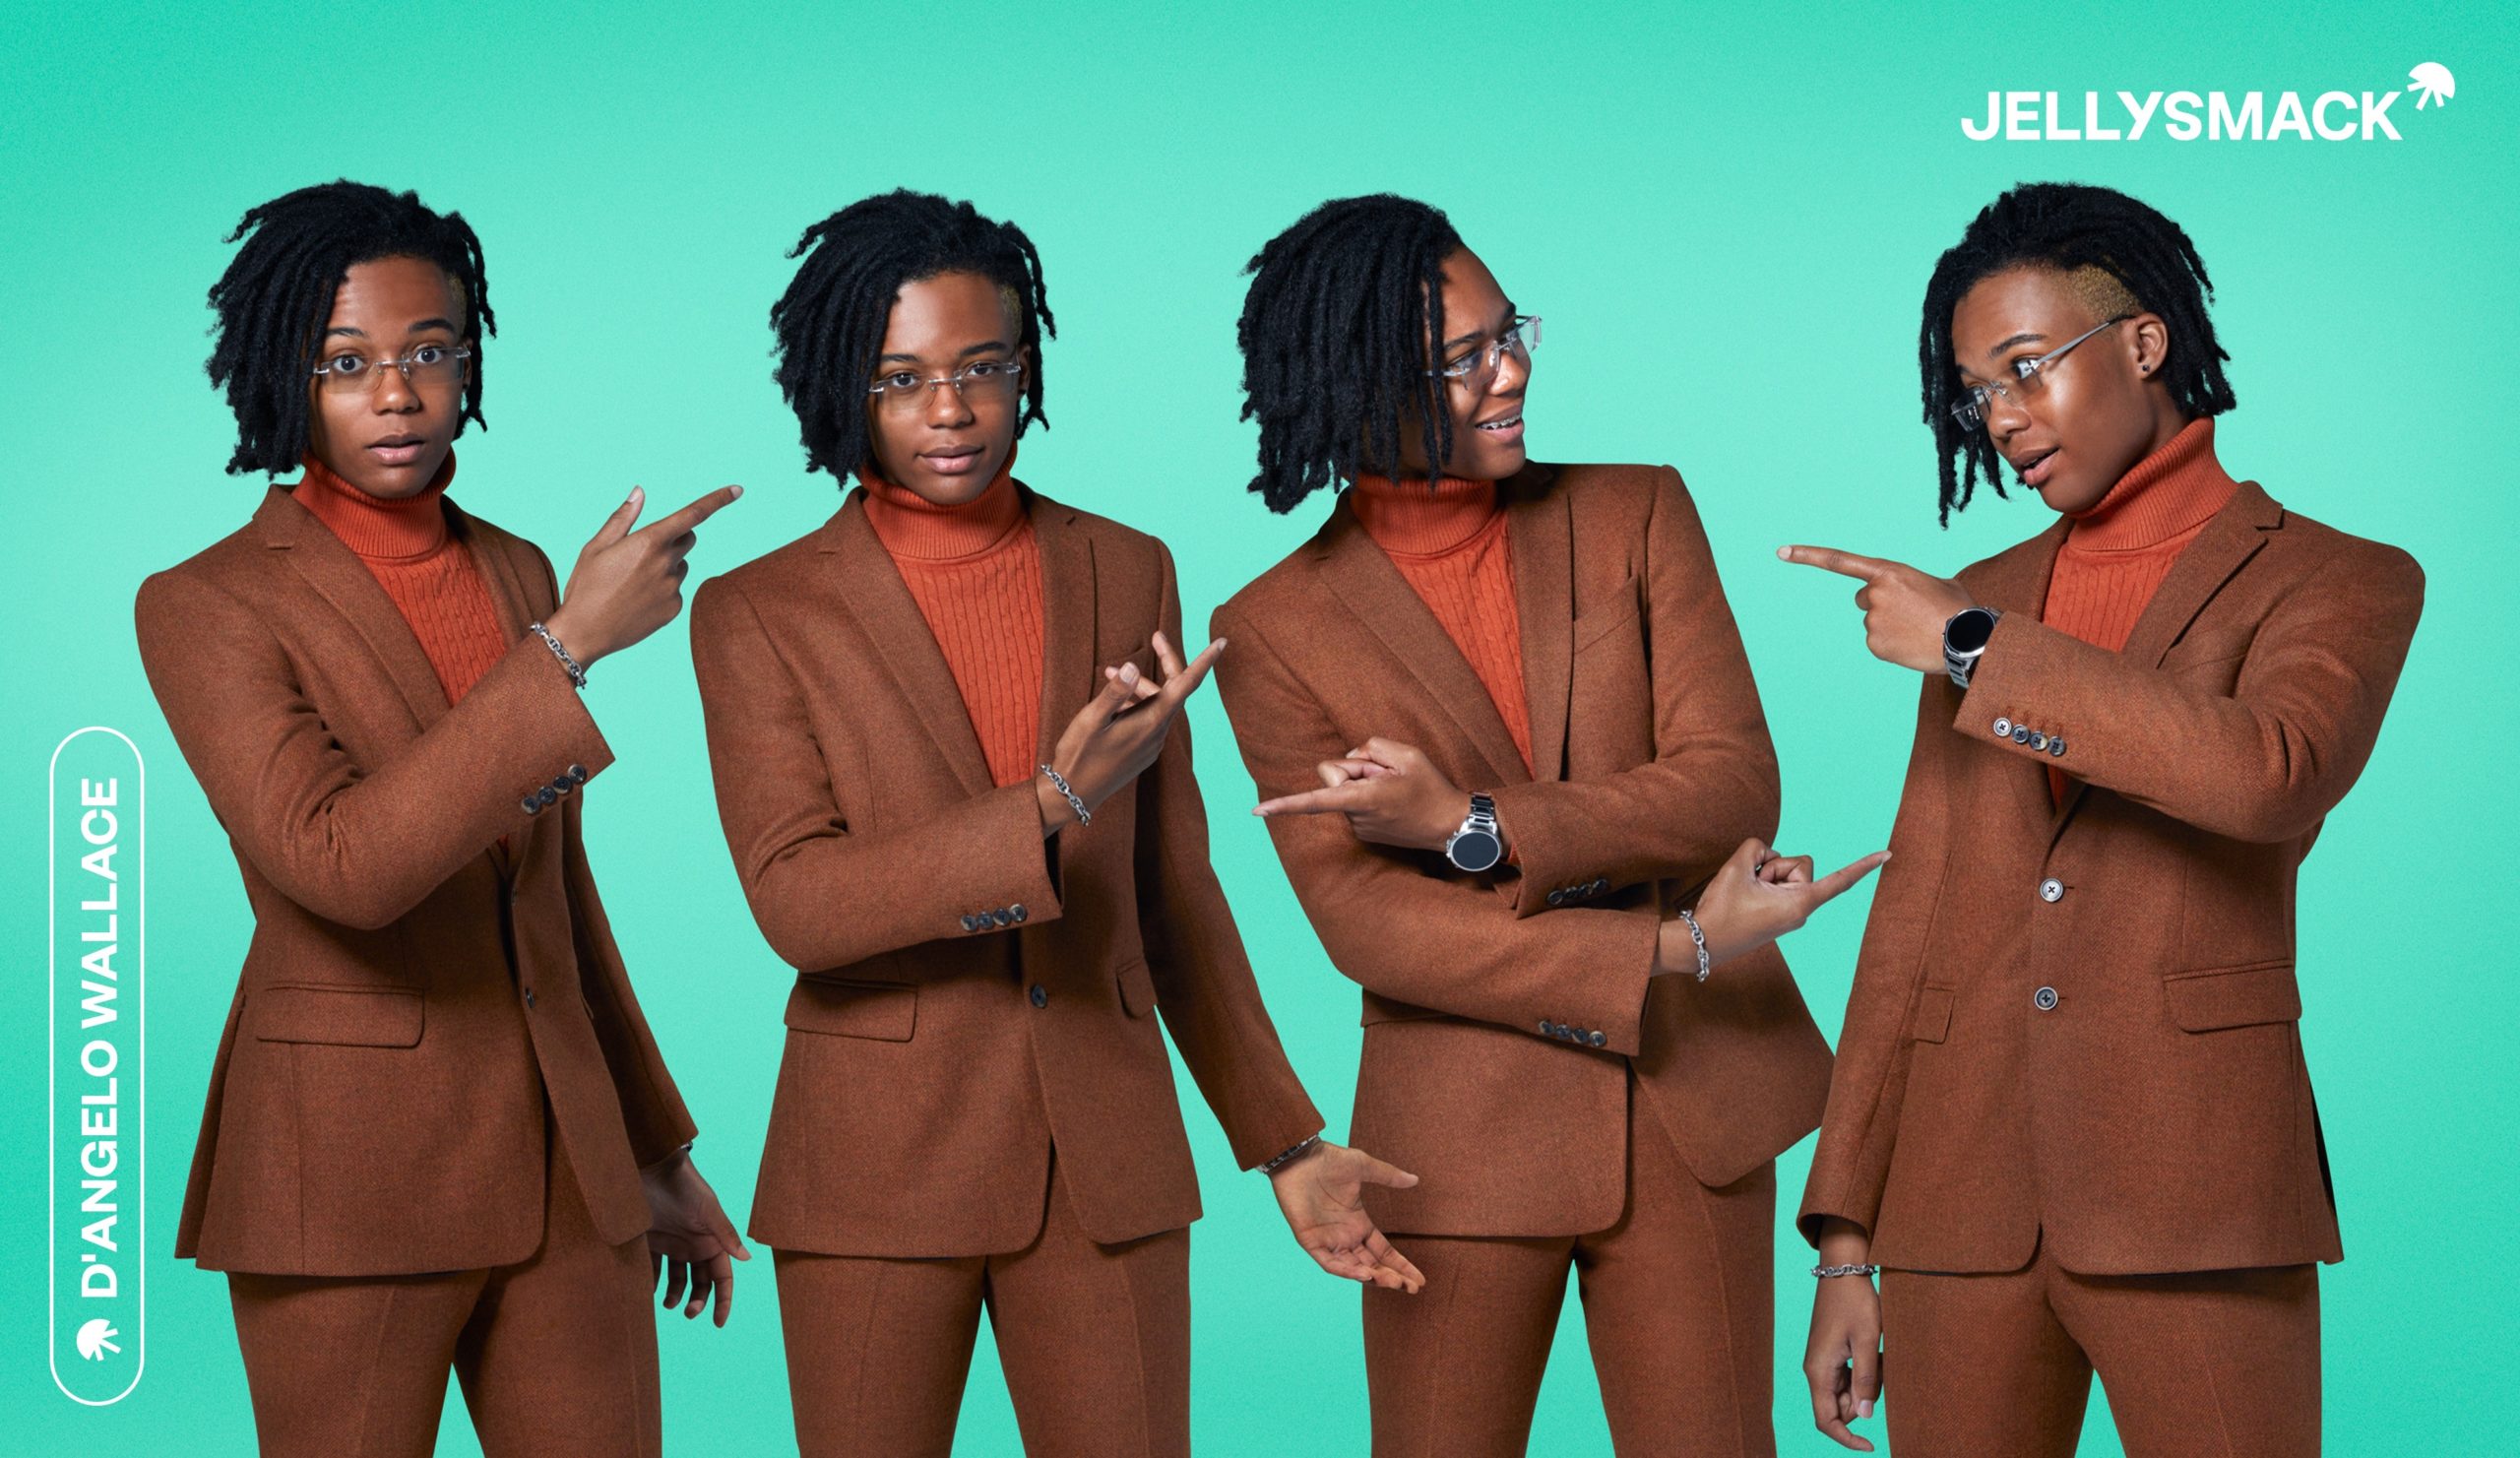 Creator DAngelo Wallace repeated four times pointing to each other on teal background.